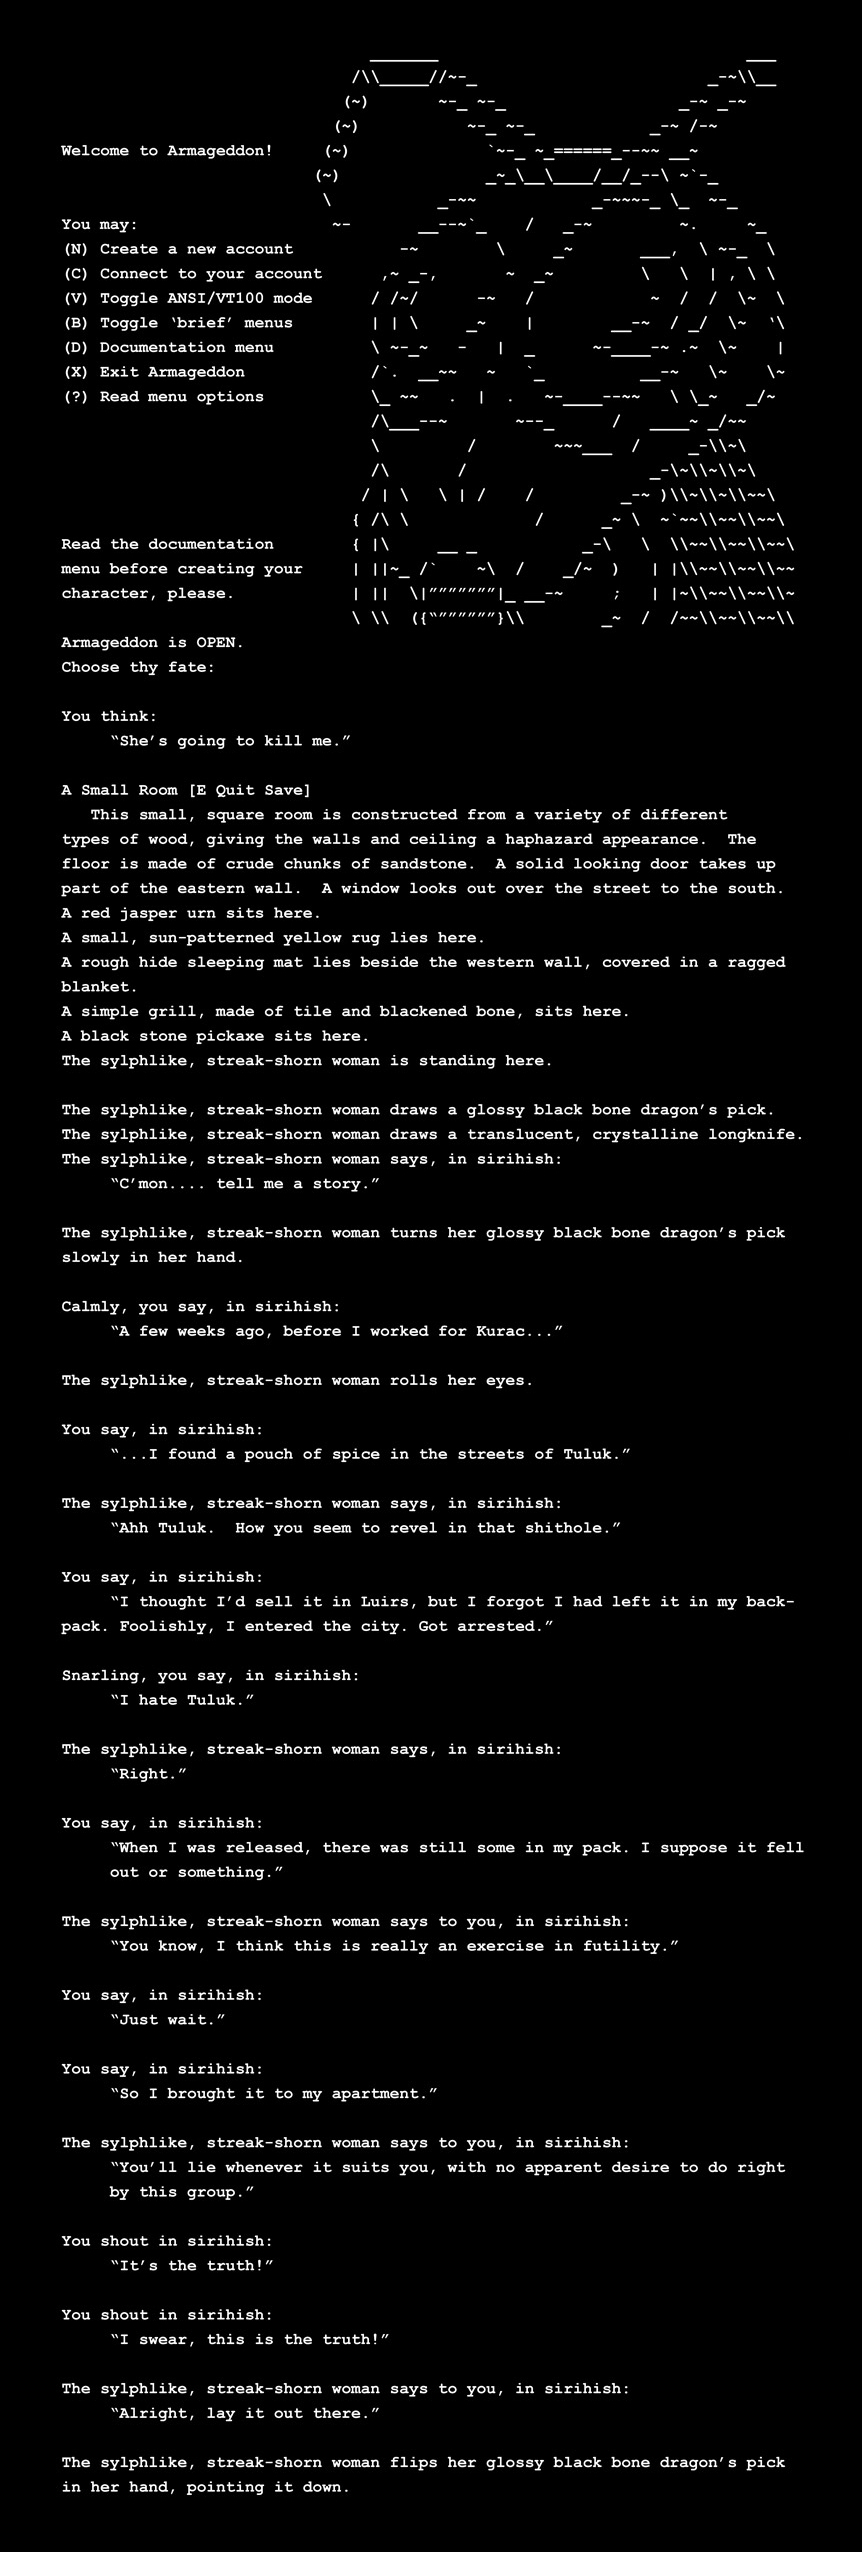 A screen capture of an Armageddon MUD log with an ASCII mantis head. The log, captured by the author in two thousand eight, records his unsuccessful attempt to plead for his life.